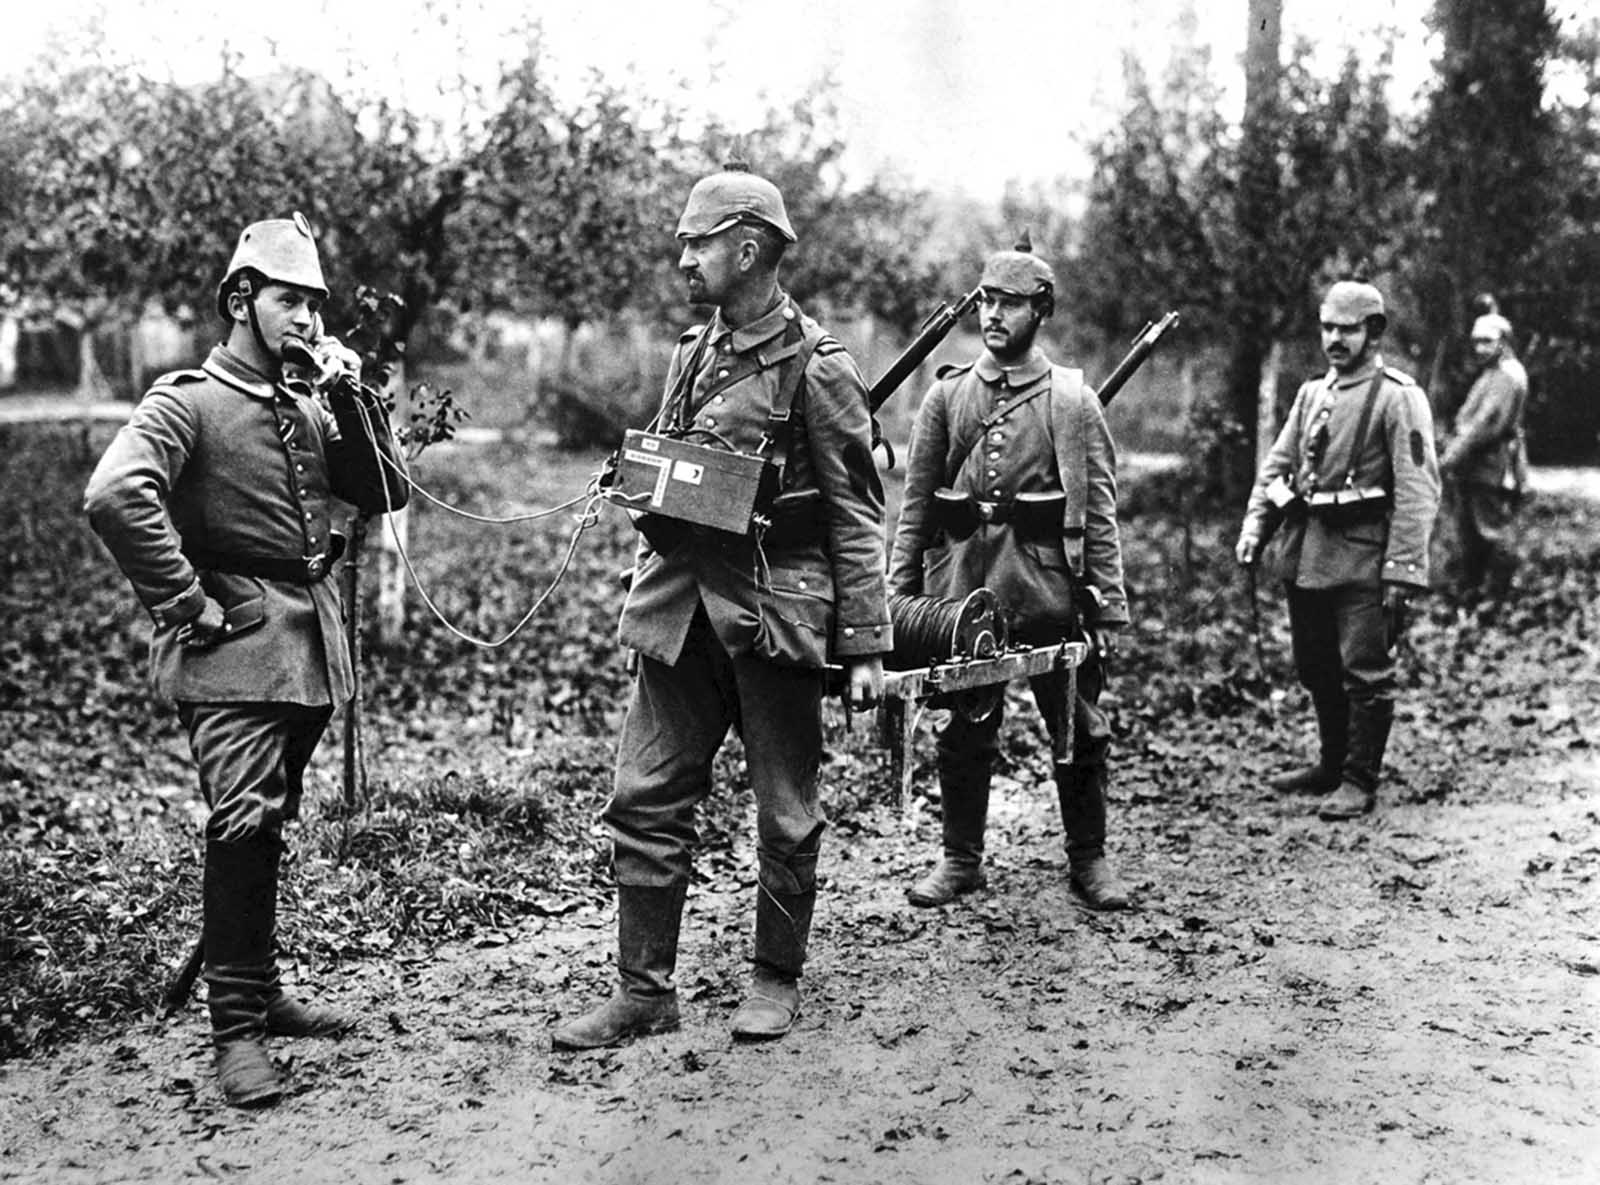 A German soldier holds the handset of a field telephone to his head, as two others hold a spool of wire, presumably unspooling it as they head into the field.